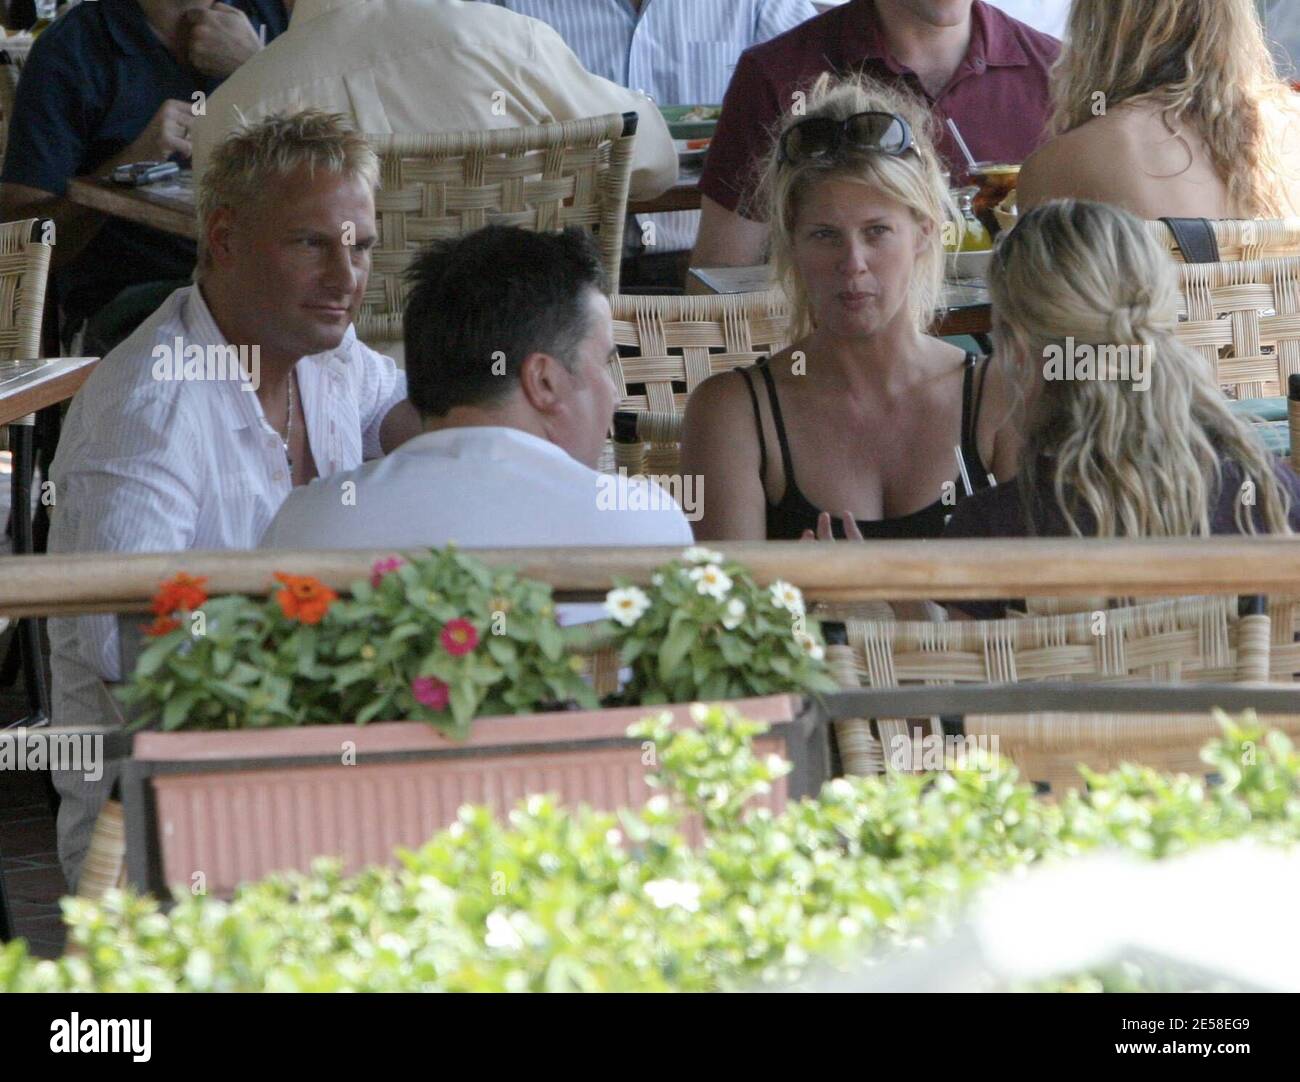 Rachel Hunter and British DIY expert and tv presenter, Phil Turner, lunch at Cafe Med with friends. 'We have a new reality show,' they joked. 'We can't talk about it, it's top secret' added Turner giggling with Hunter as they left. West Hollywood, Calif. 7/25/07.  [[rac ral]] Stock Photo